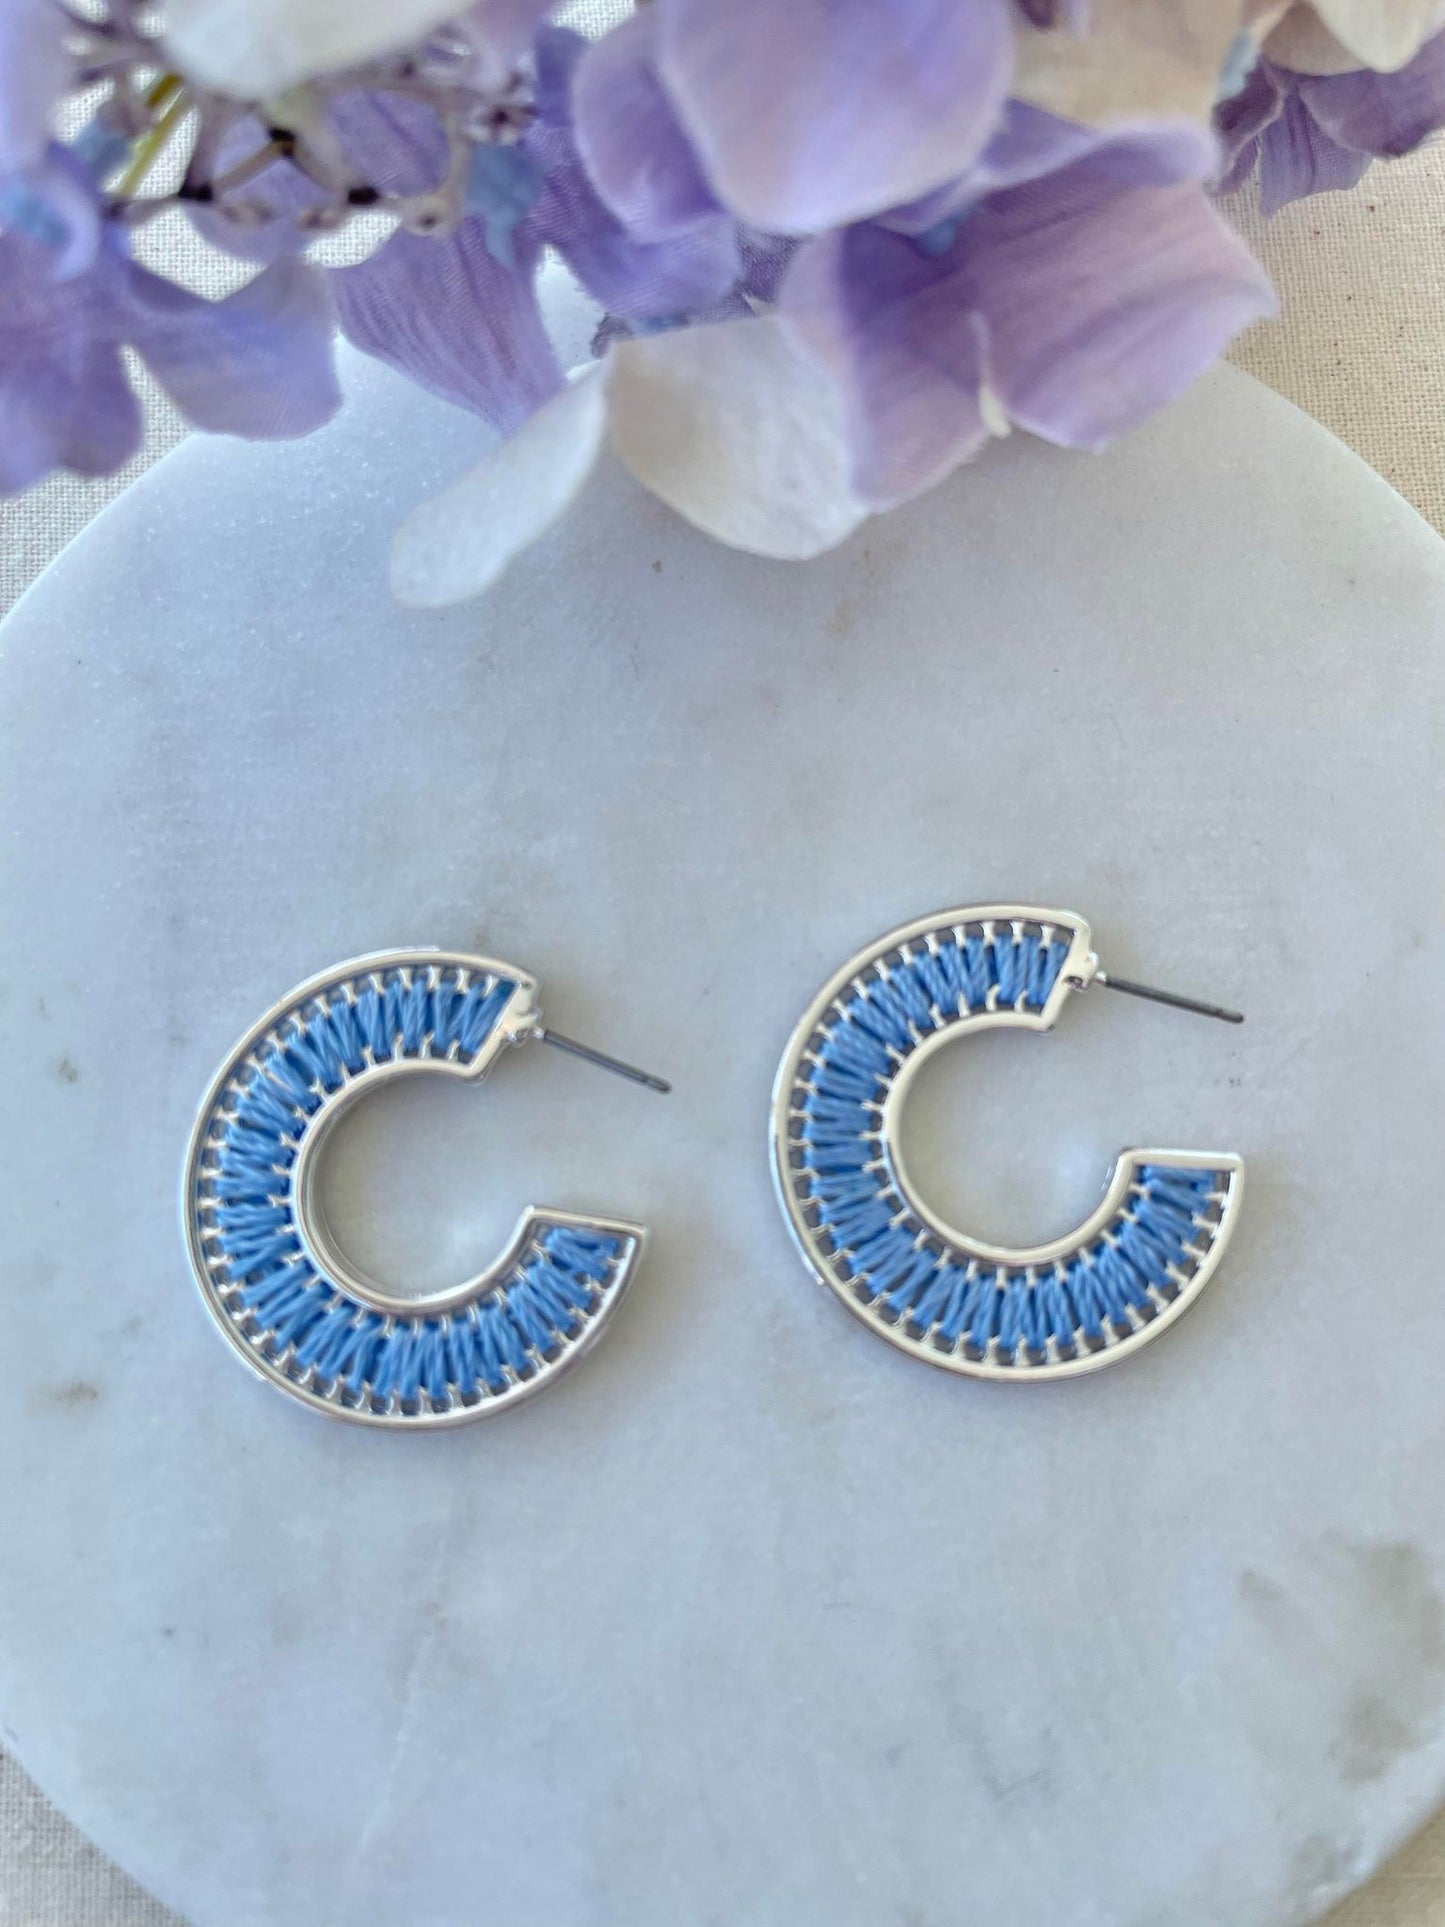 Stitched hoop earrings - silver and blue